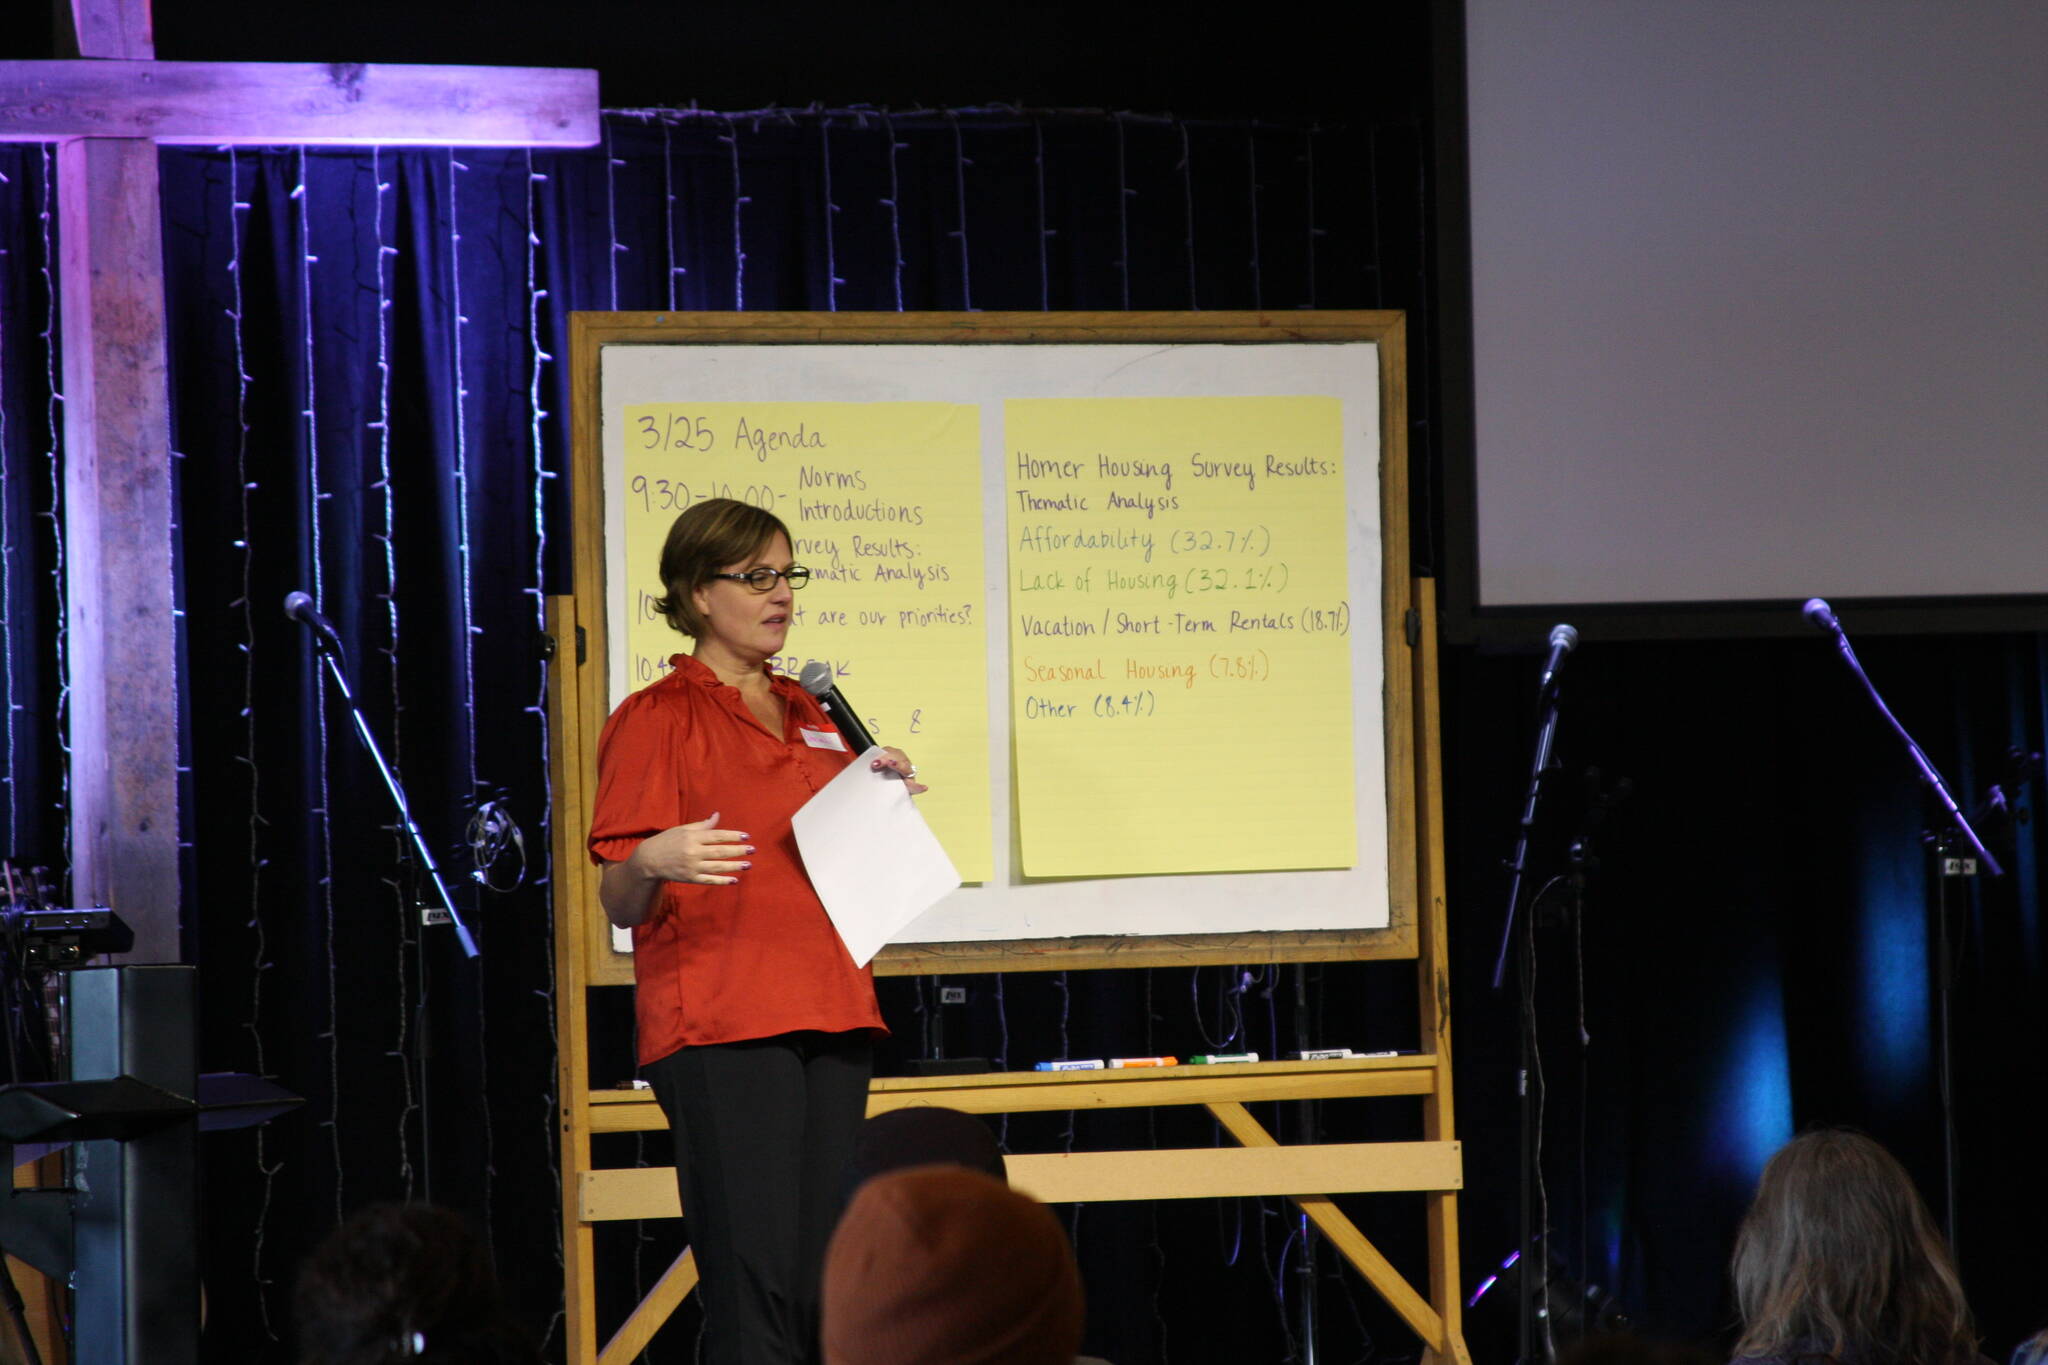 Denali Daniels facilitates the community conversation on housing solutions in the greater Homer area at Christian Community Church on Saturday. Photo by Delcenia Cosman